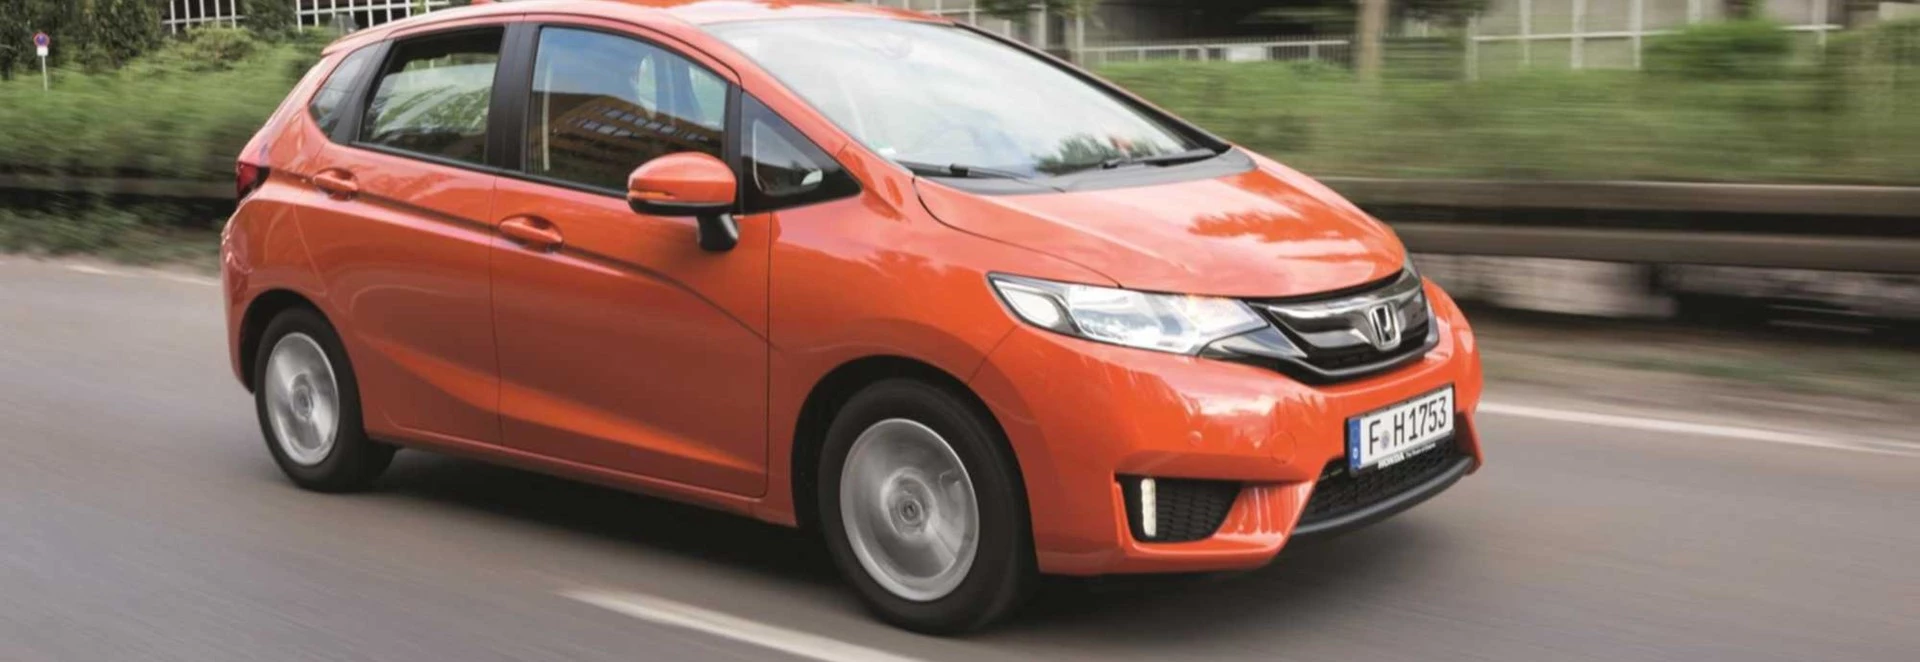 All-new Honda Jazz priced from £13,495 